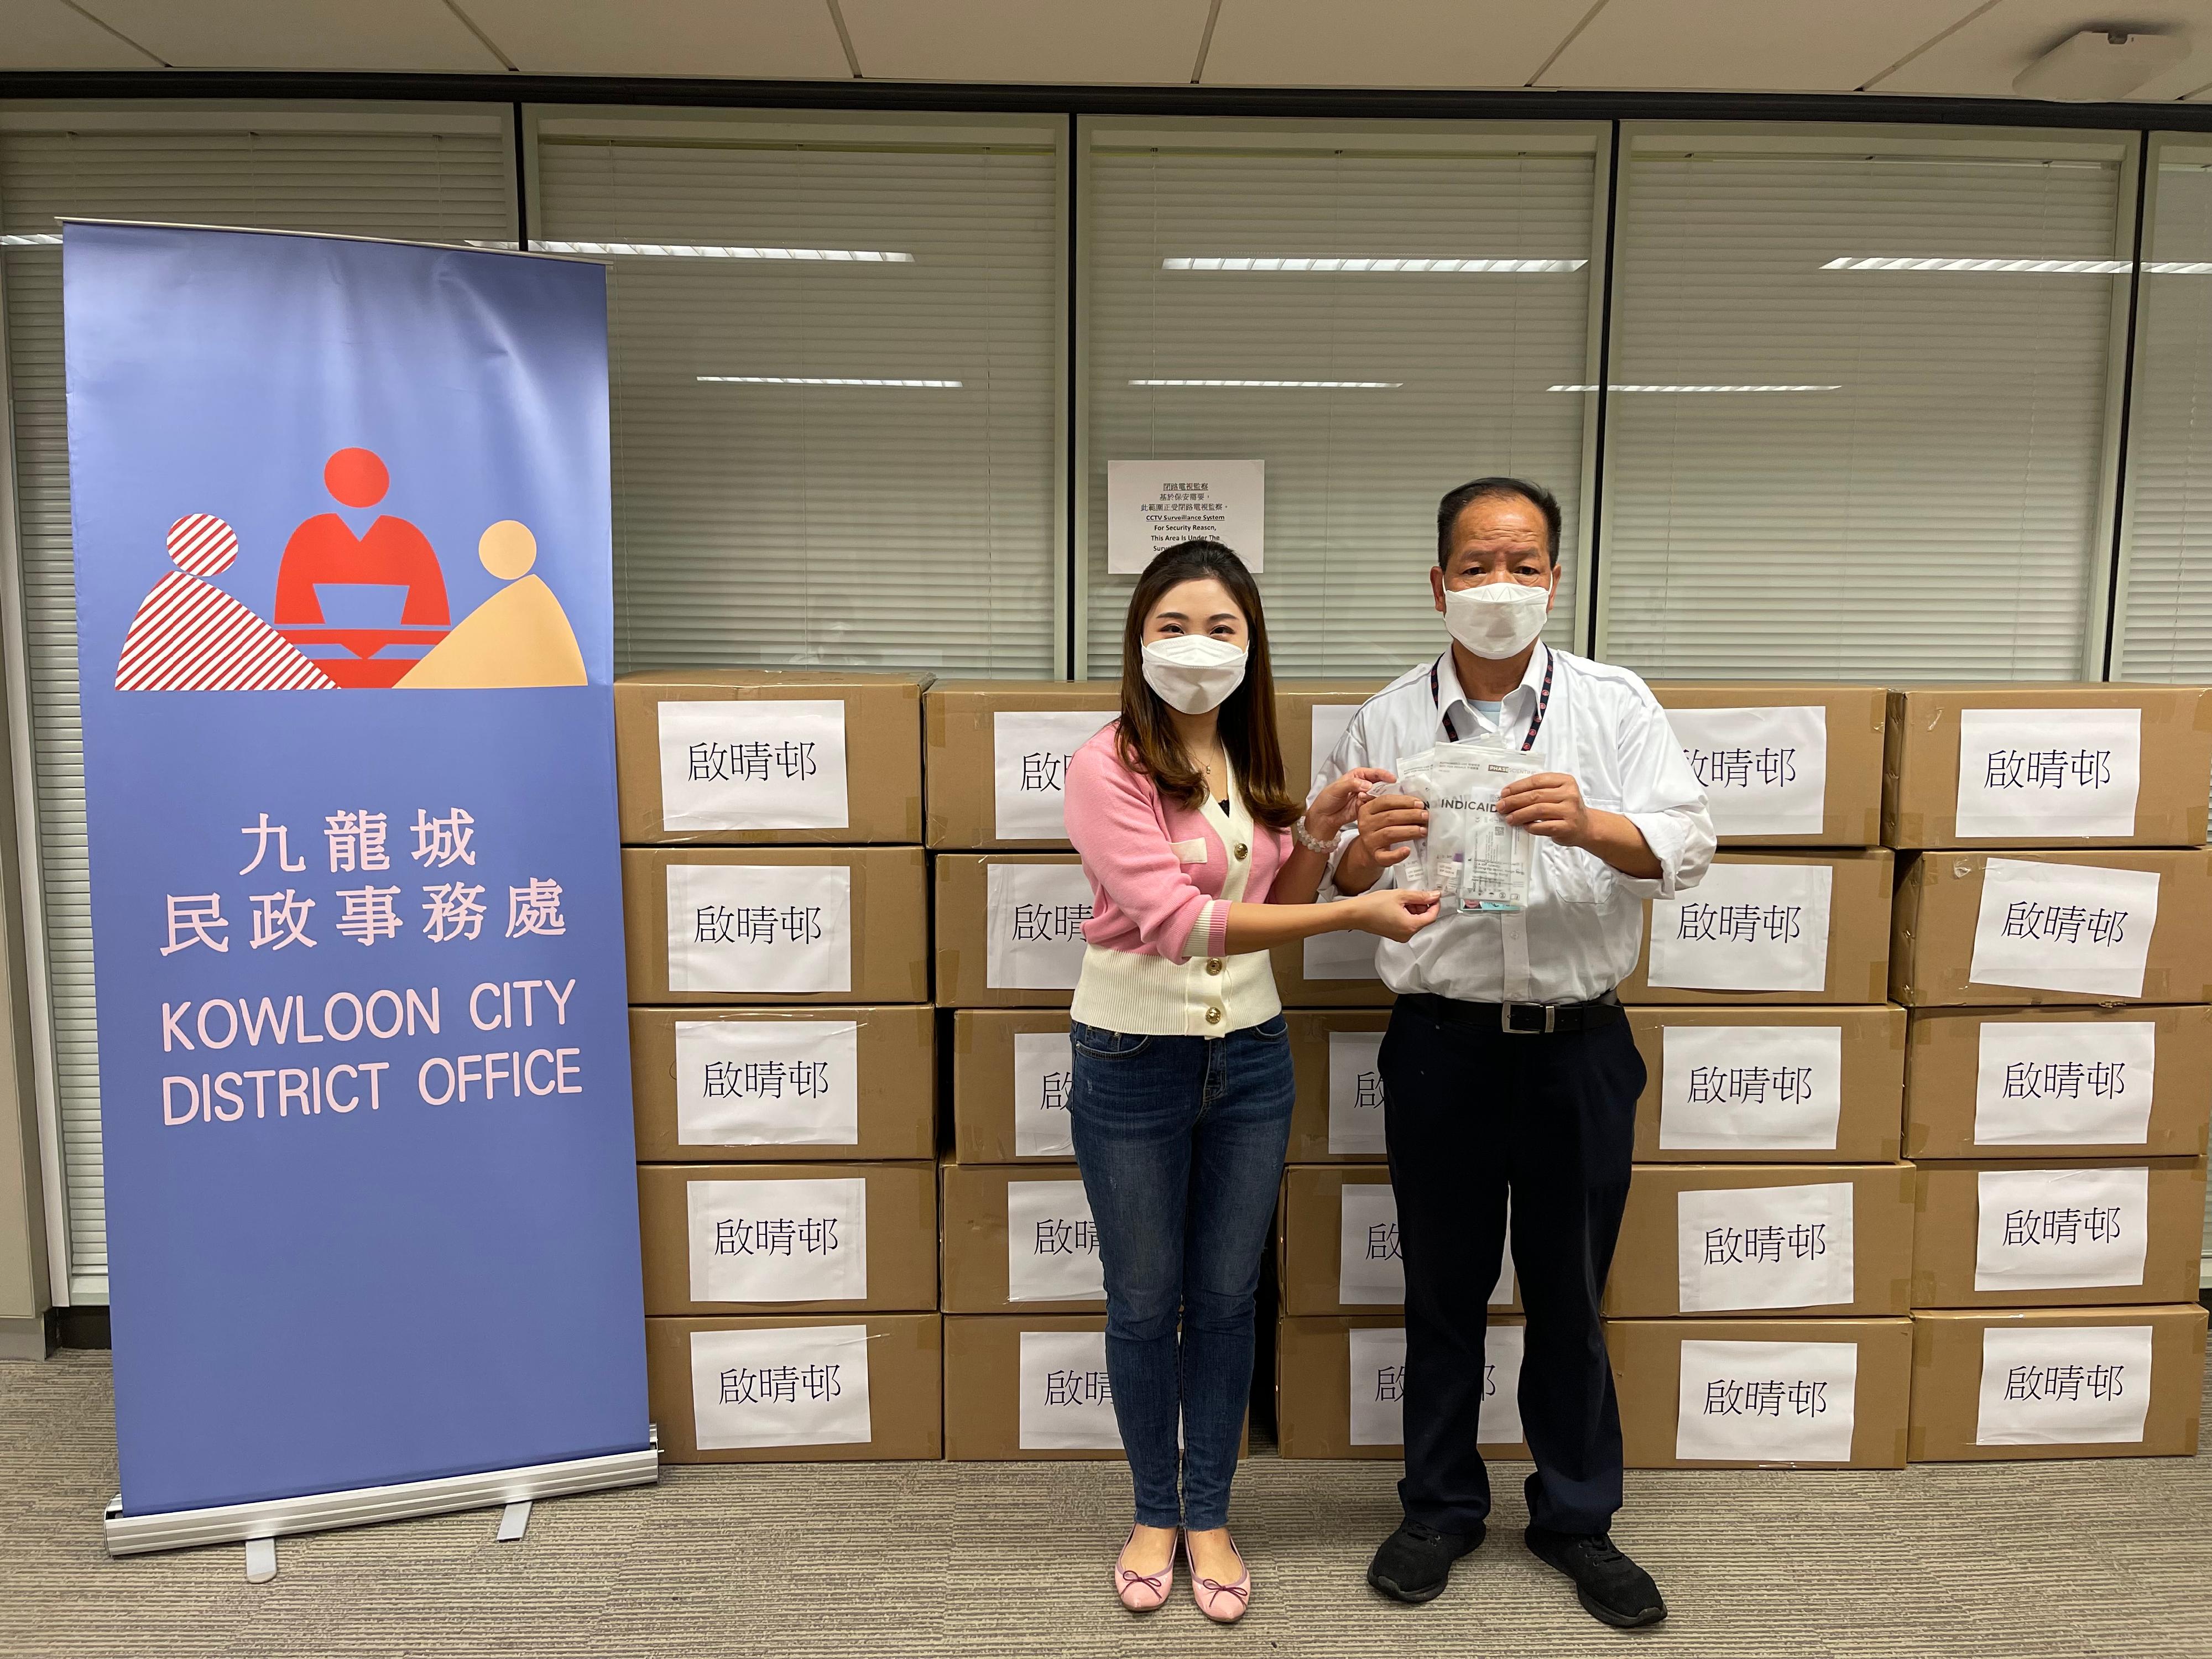 The Kowloon City District Office distributed COVID-19 rapid test kits to households, cleansing workers and property management staff living and working in Kai Ching Estate for voluntary testing through the property management company.